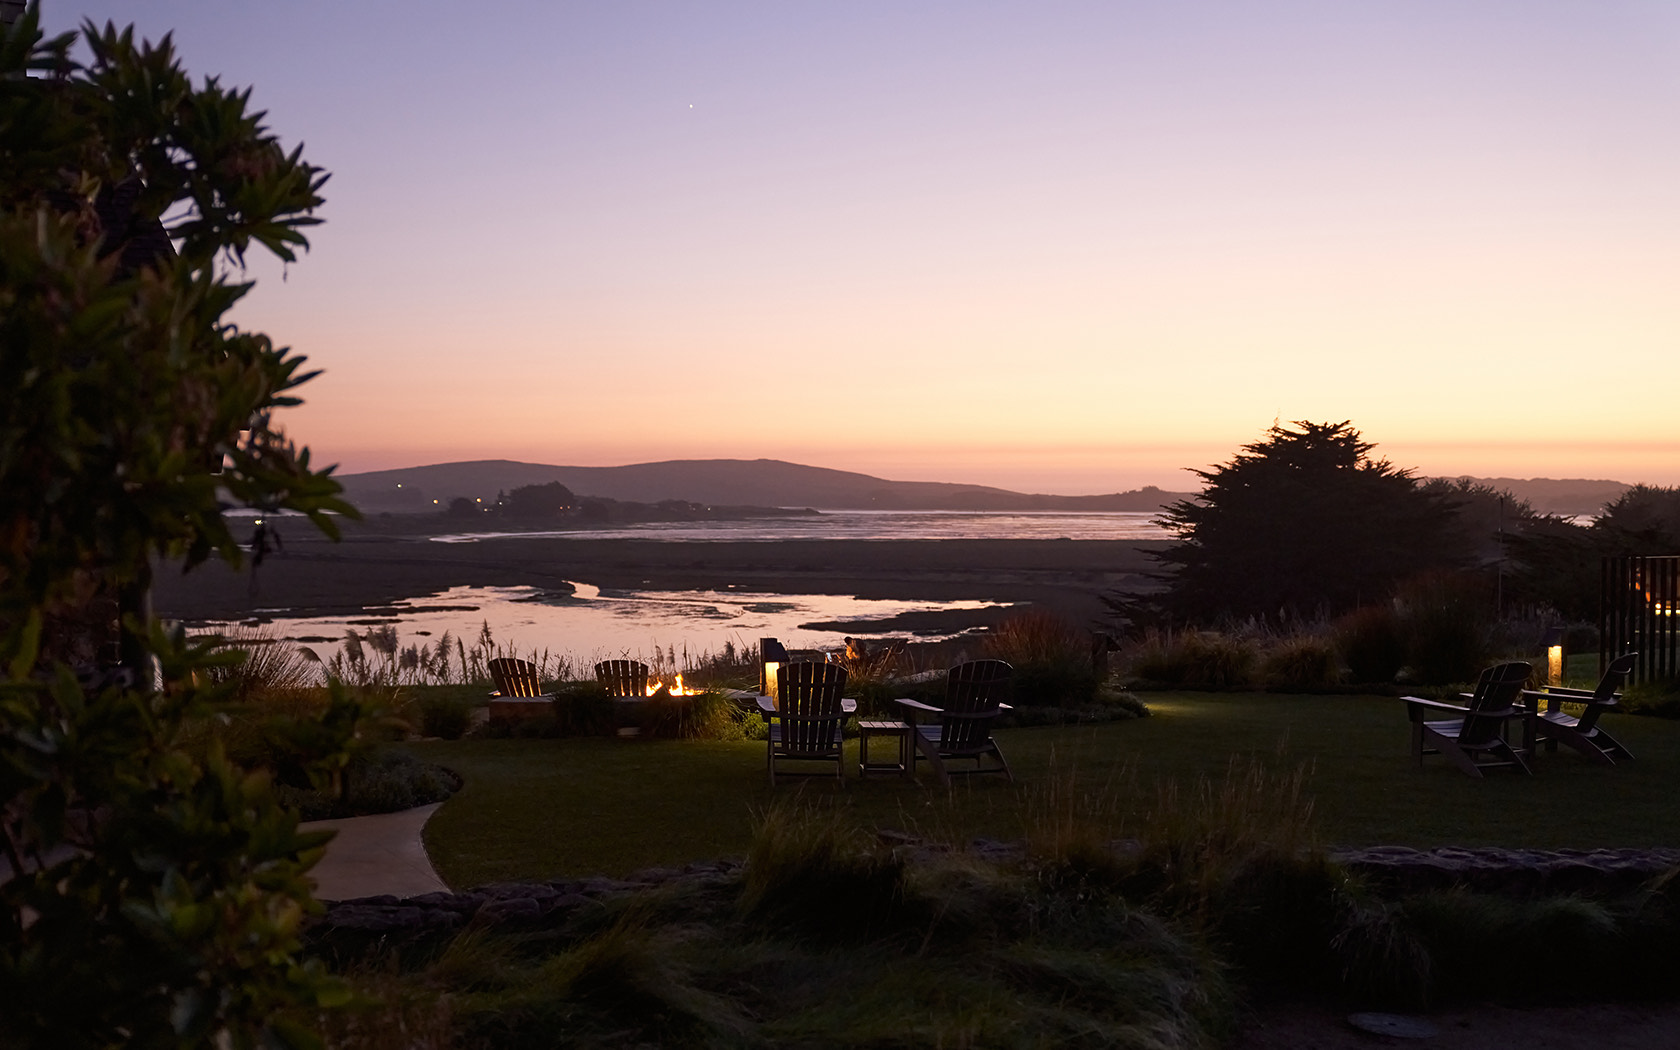 View of the Bodega bay property at sunset